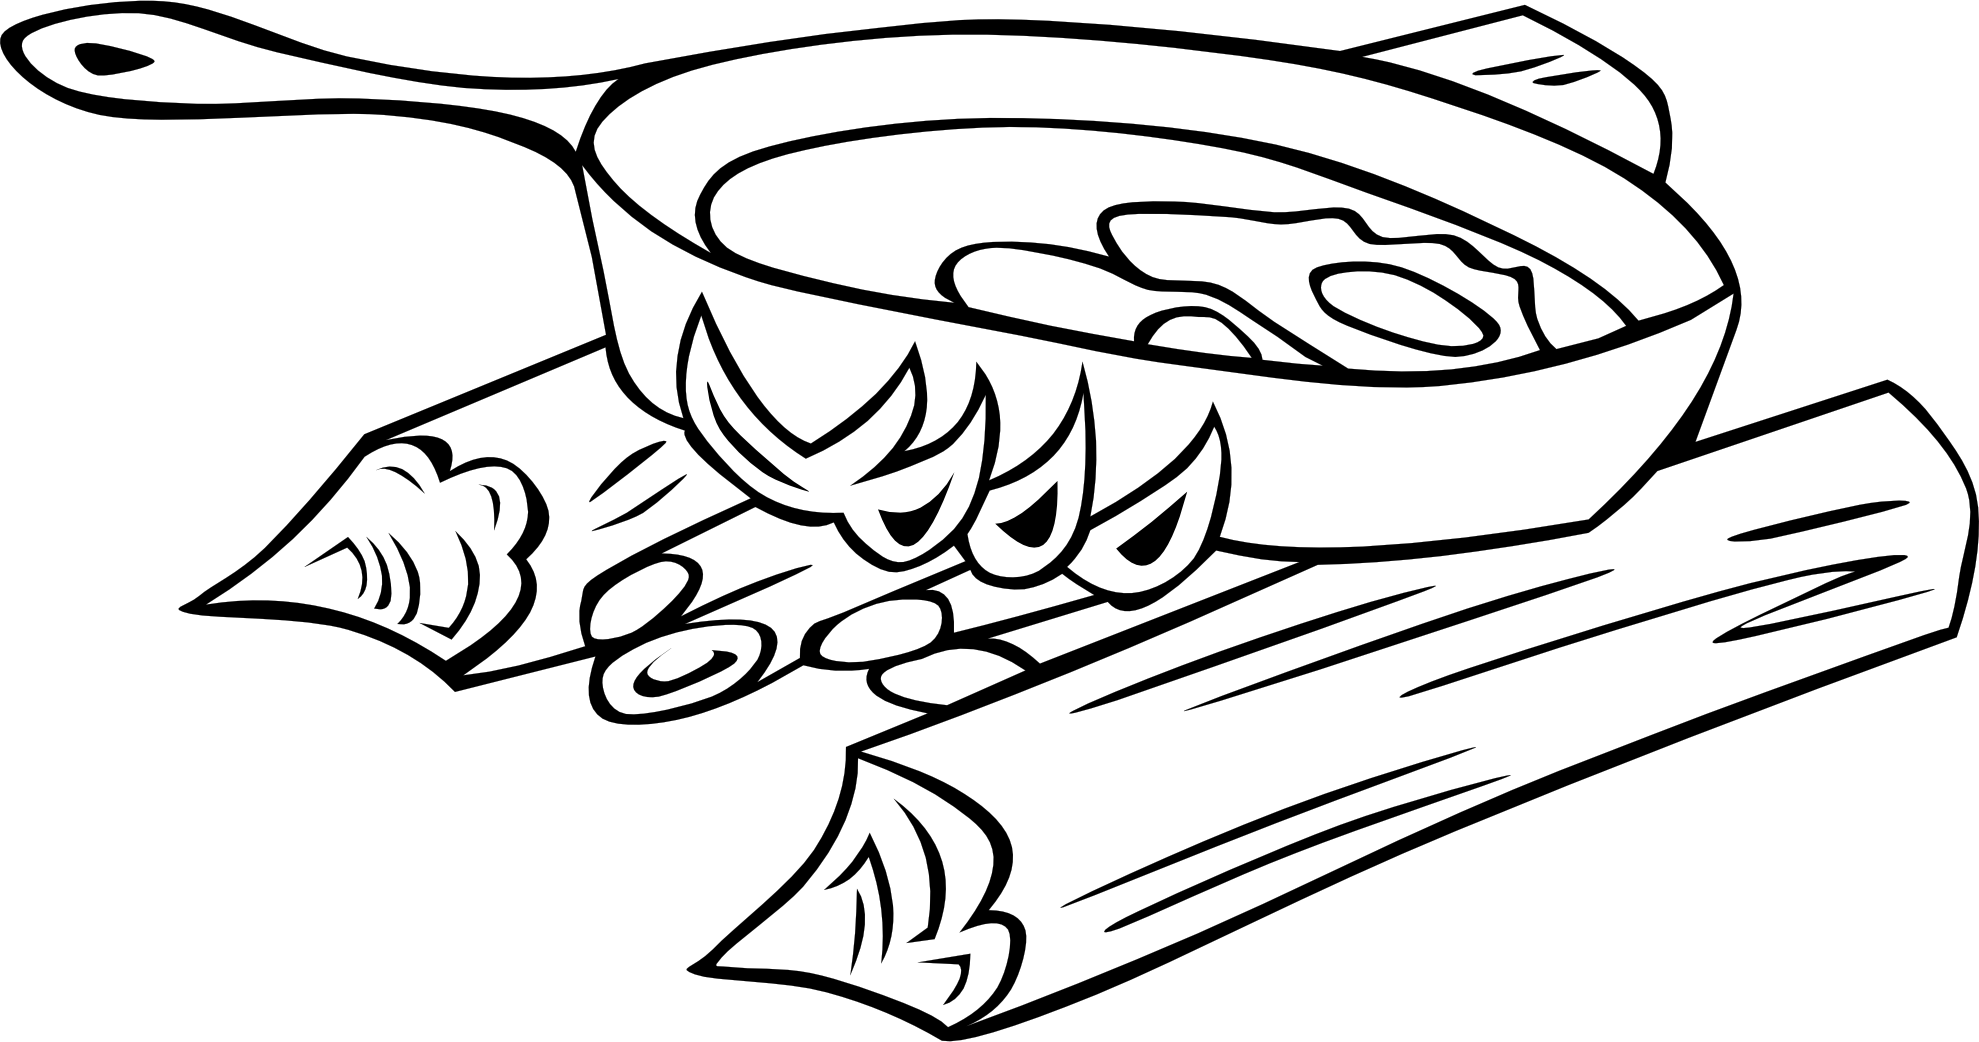 Cooking Black and White Logo - Campfire Cooking Clipart Clipart Image